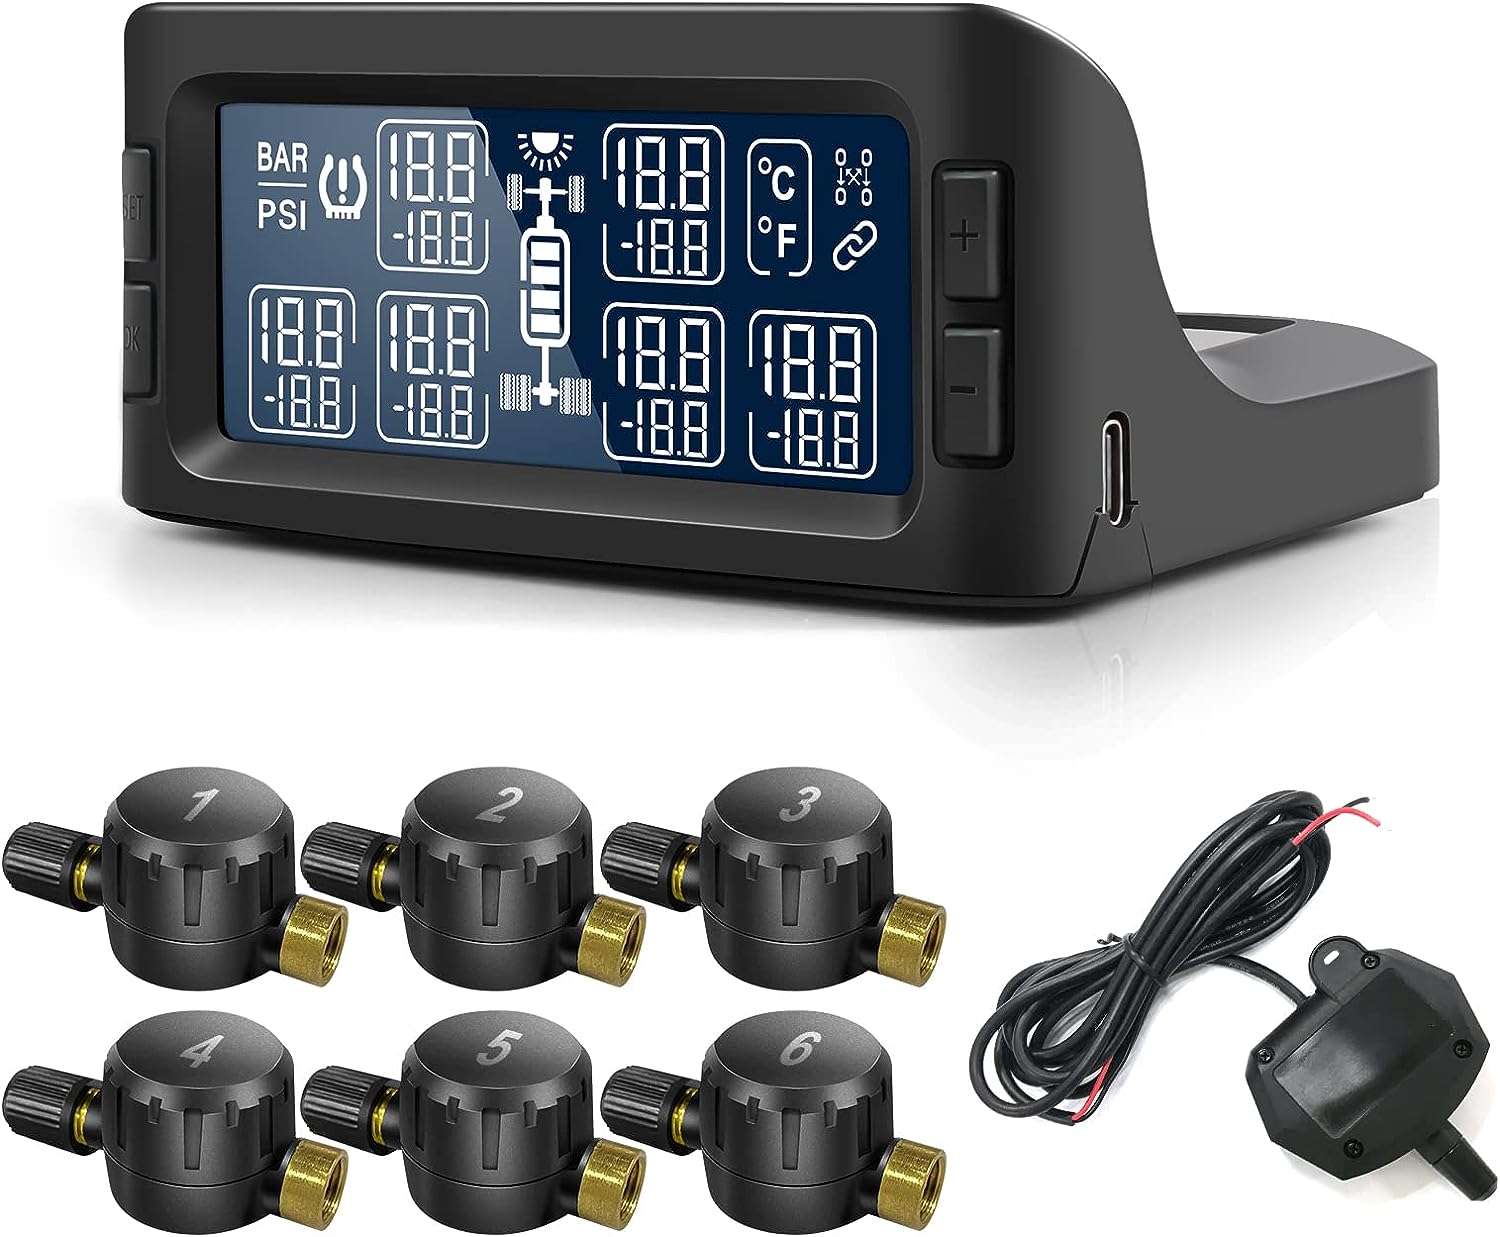 Easesuper Rv Tire Pressure Monitoring System, Large [...]